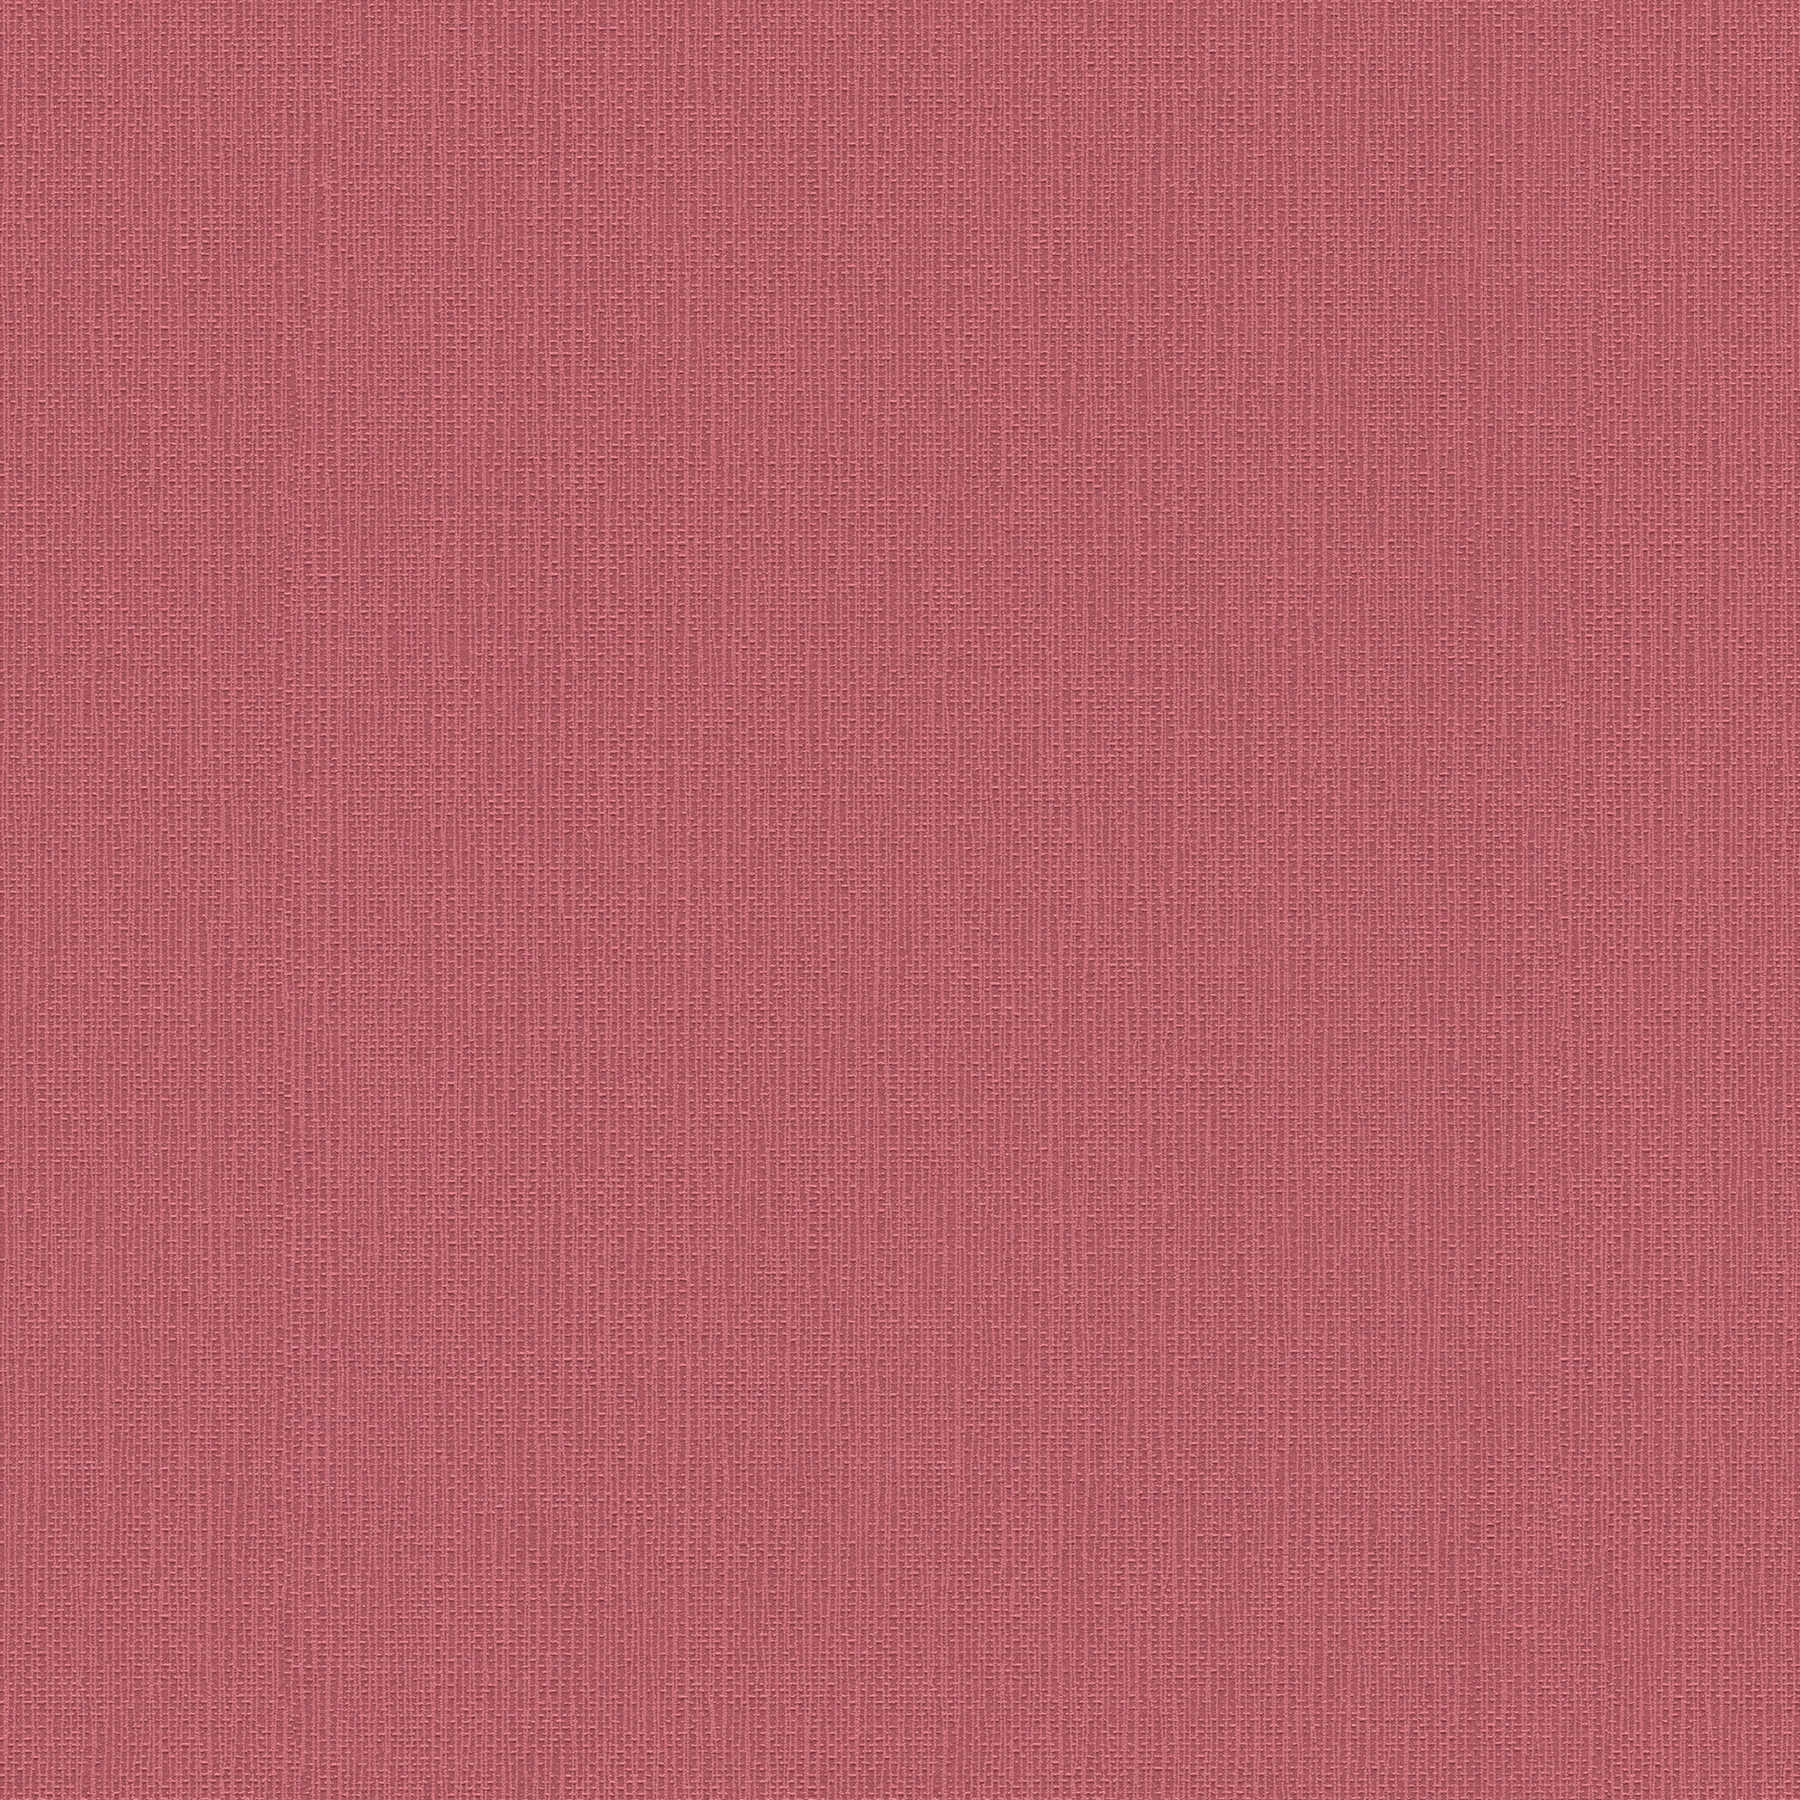 Linen look wallpaper old pink plain with embossed structure
